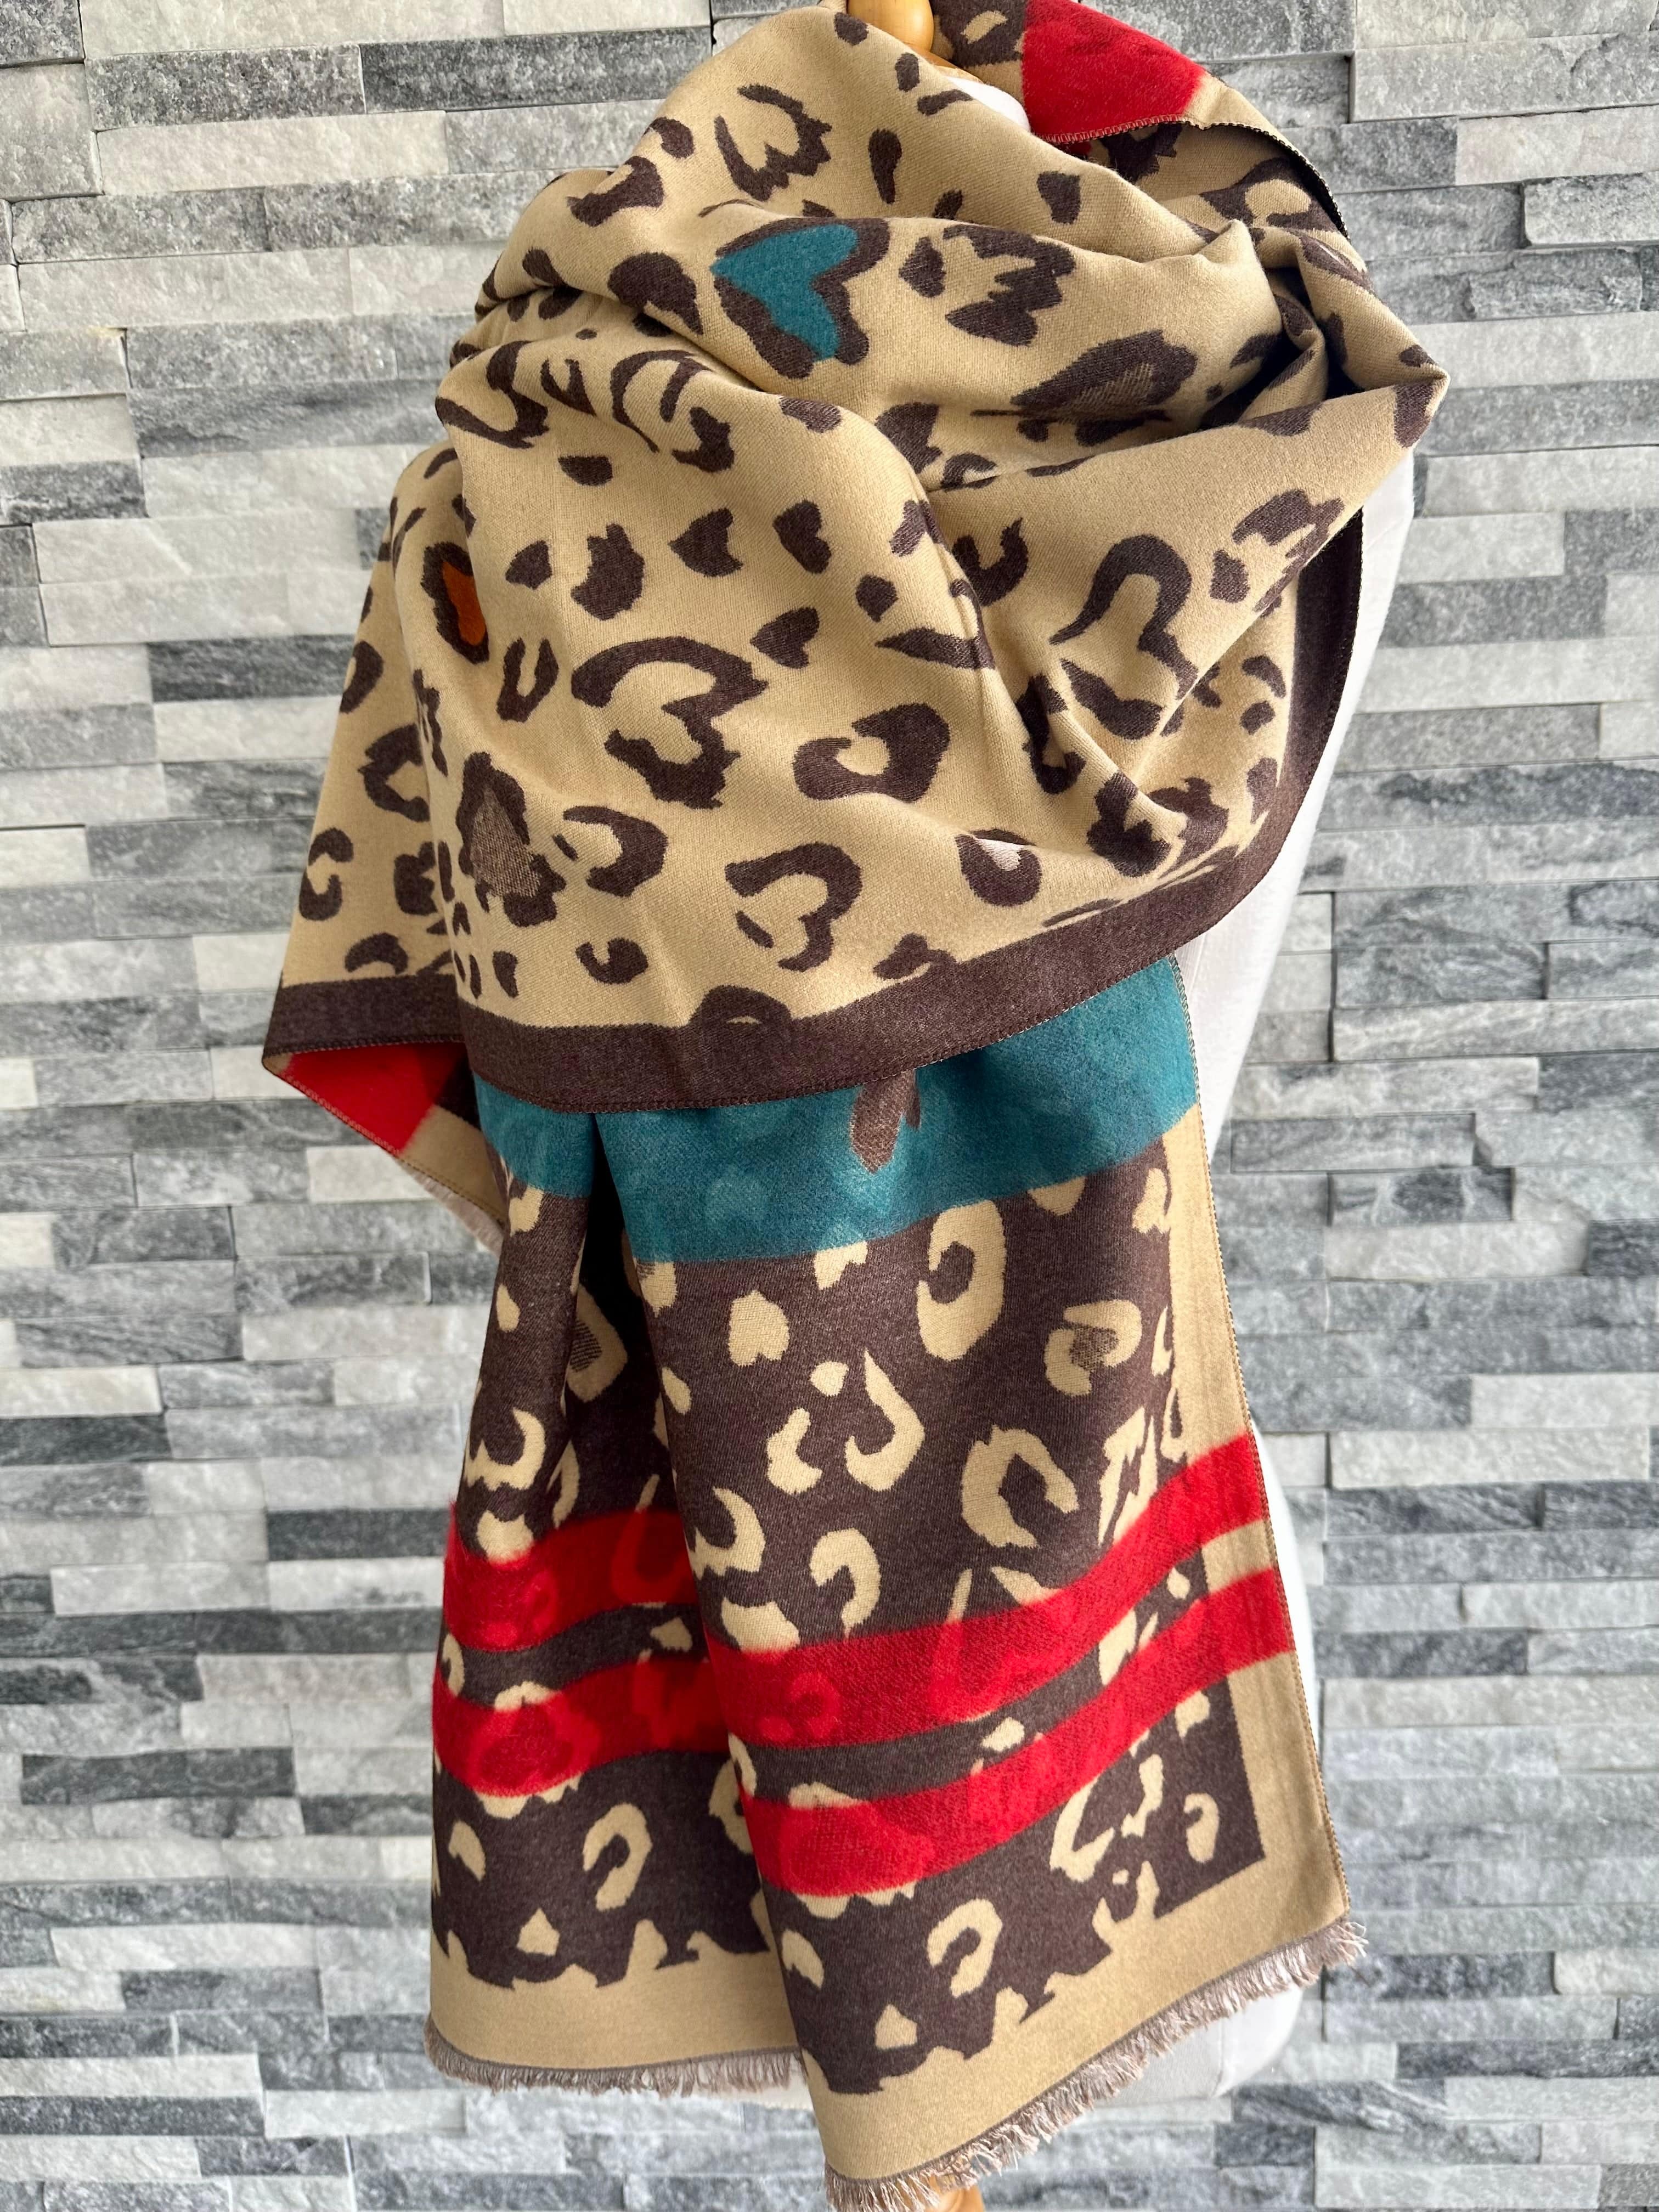 lusciousscarves Reversible Brown and Beige Animal Print and Hearts Design Scarf / Wrap.